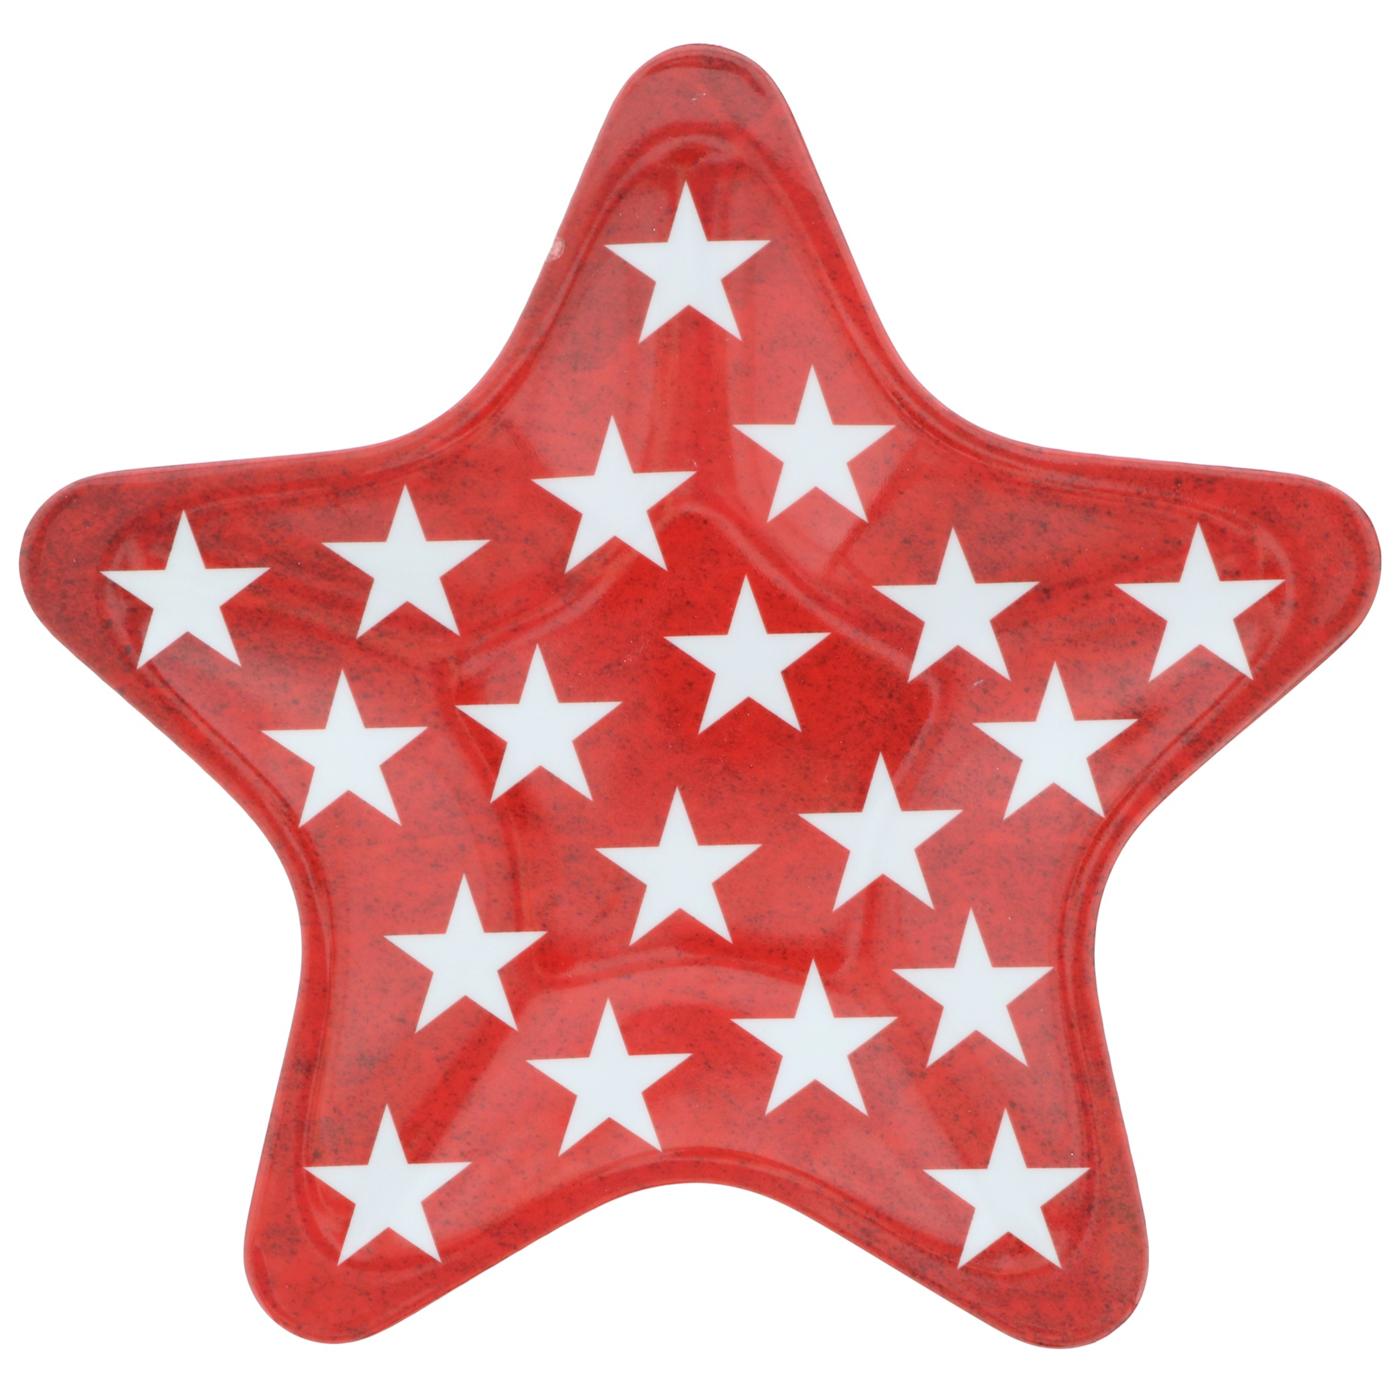 Dining Style Star Shaped Appetizer Plates, Assorted; image 1 of 2